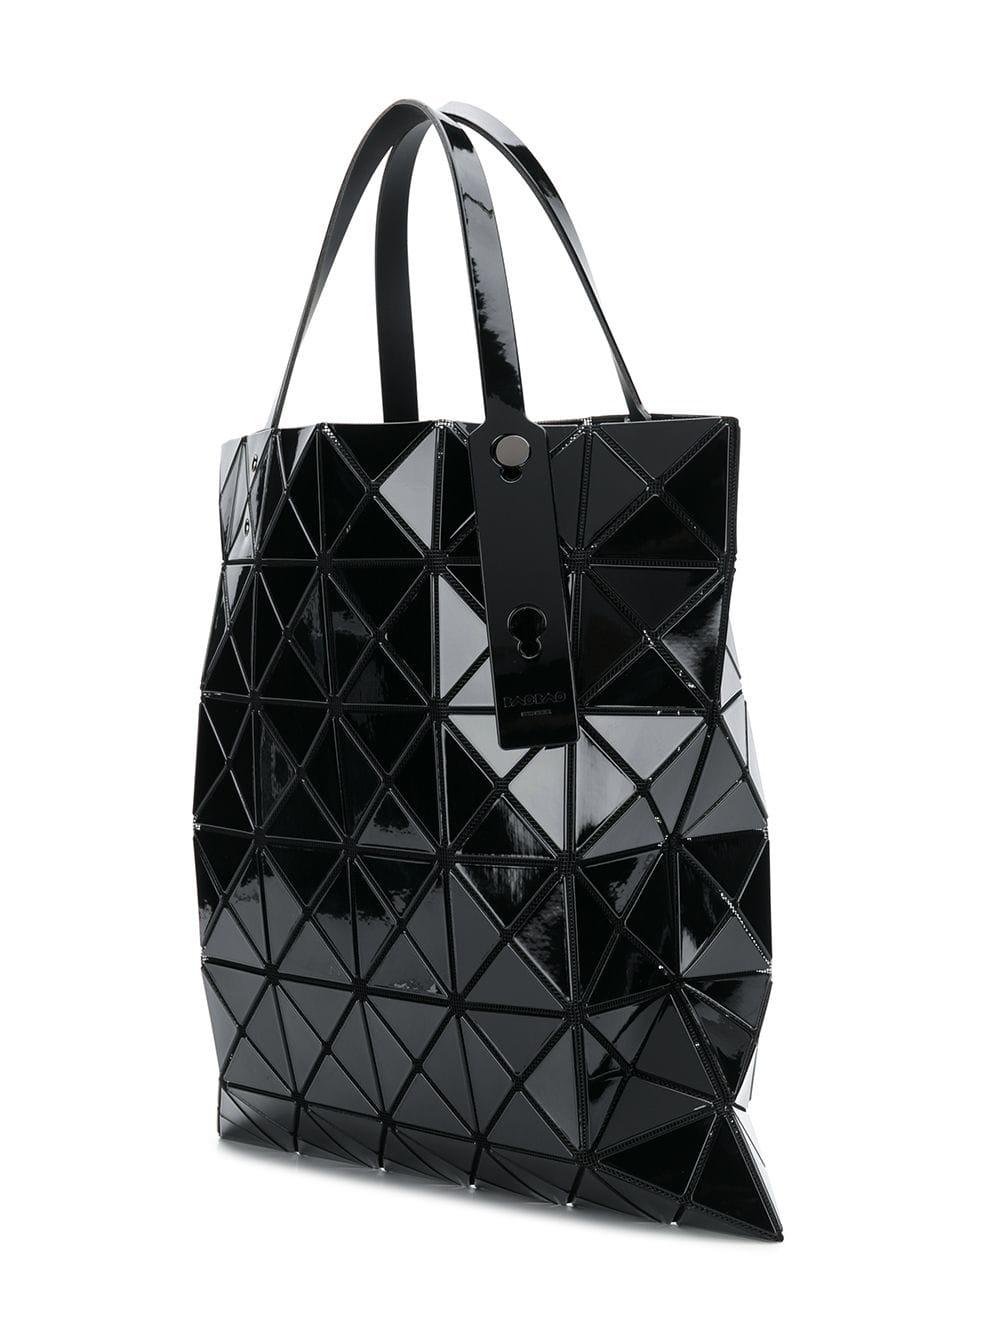 Bao Bao Issey Miyake Lucent Tote Bag in Black - Lyst